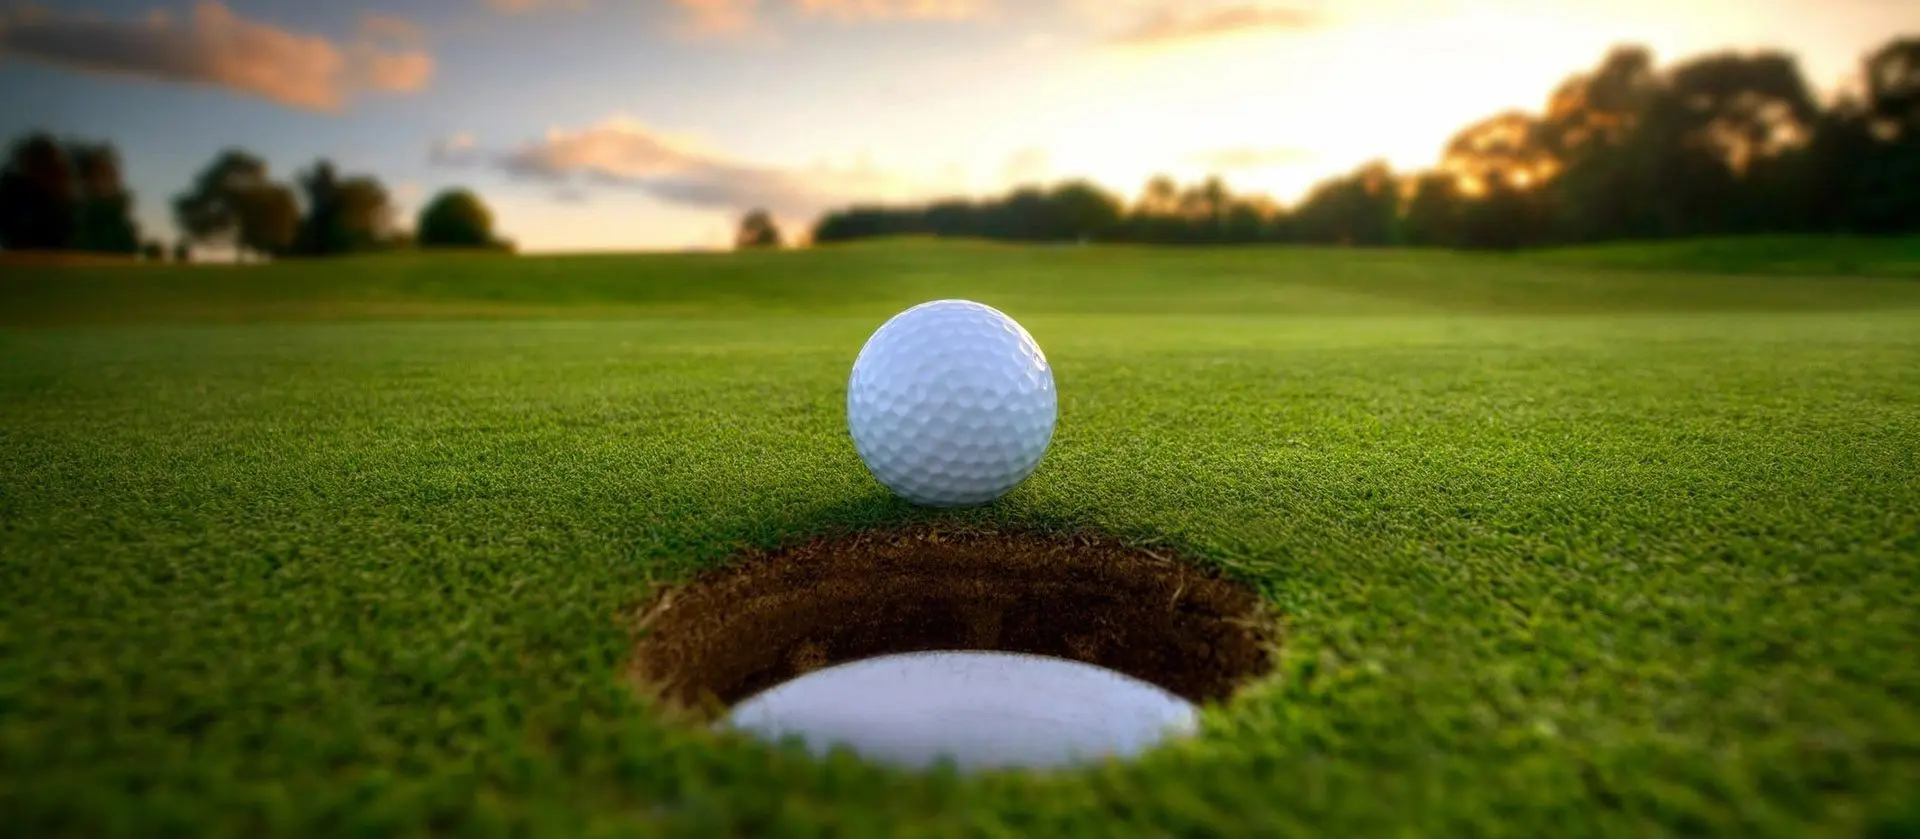 A golf ball is in the hole and ready to hit.